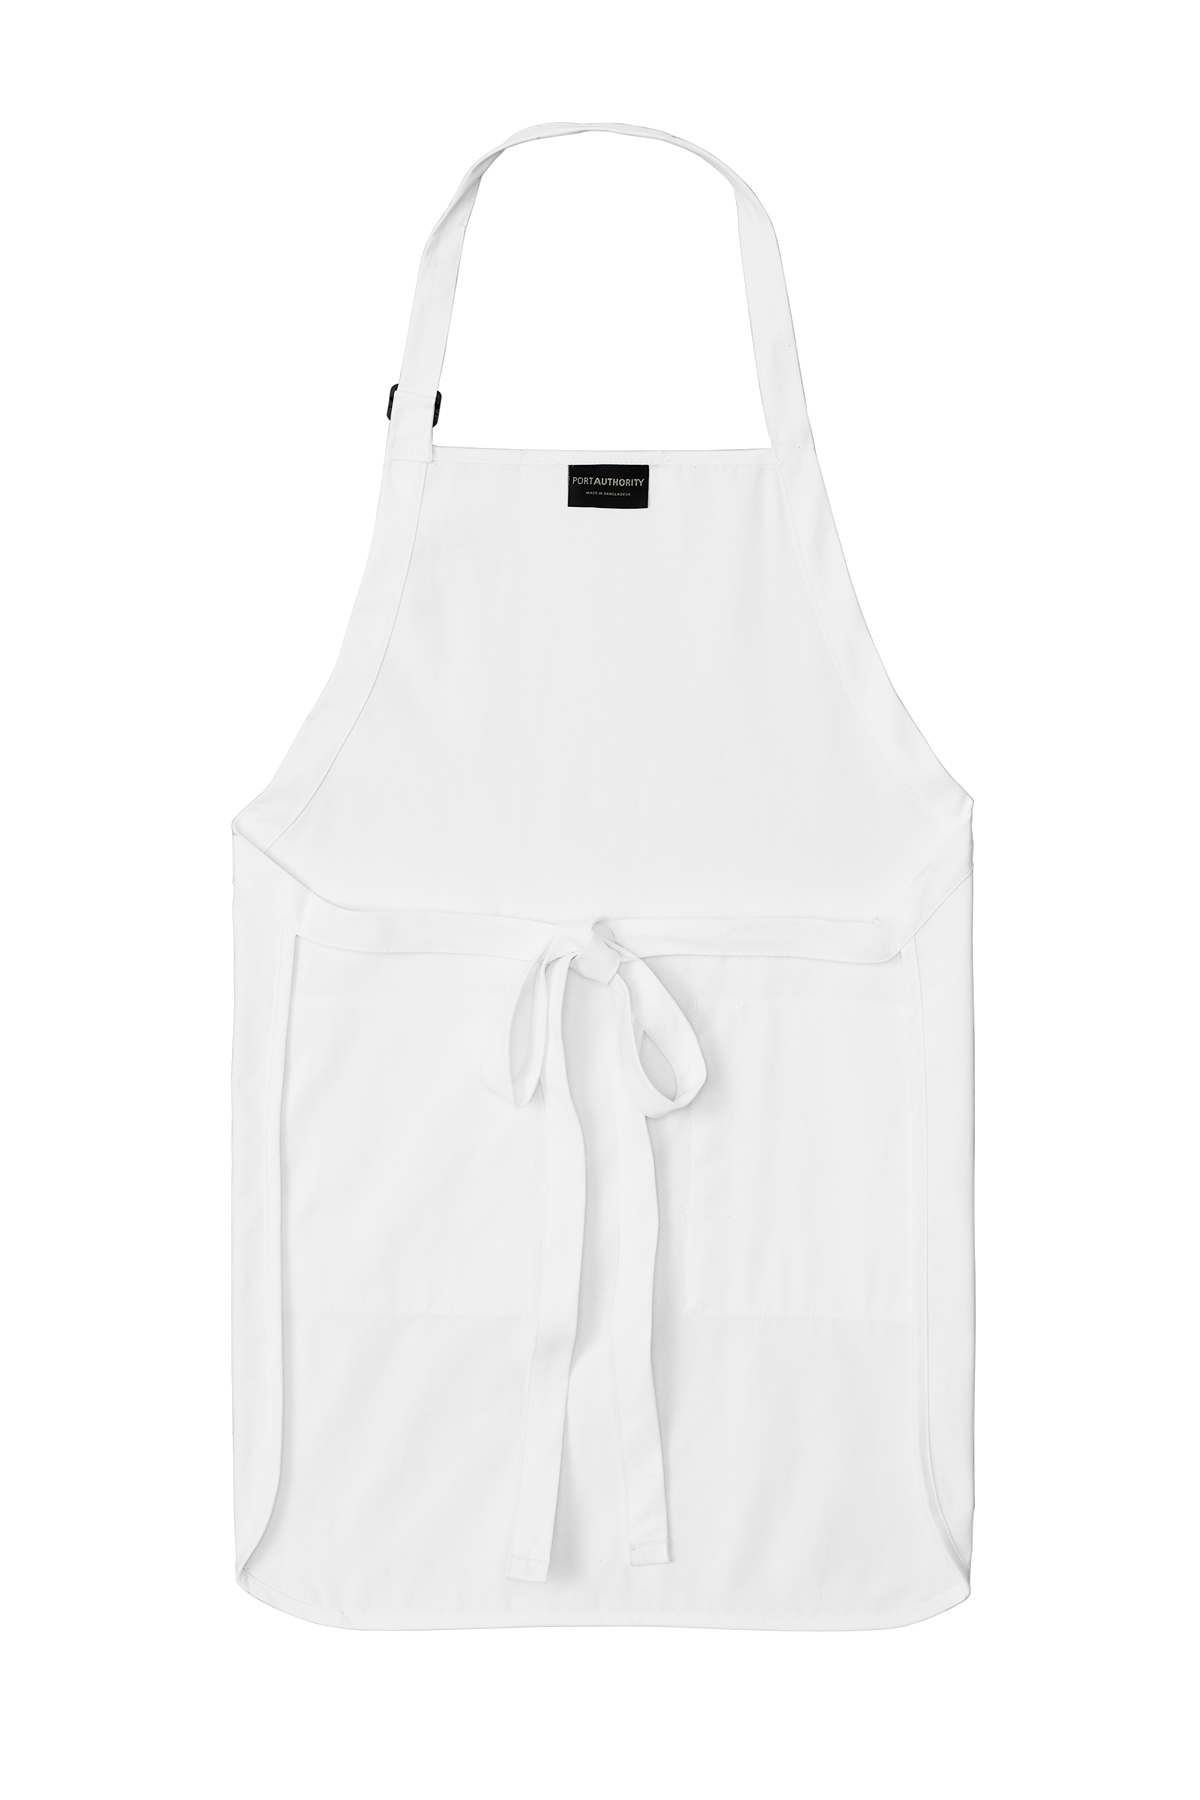 Port Authority Full-Length Apron with Pockets | Product | SanMar